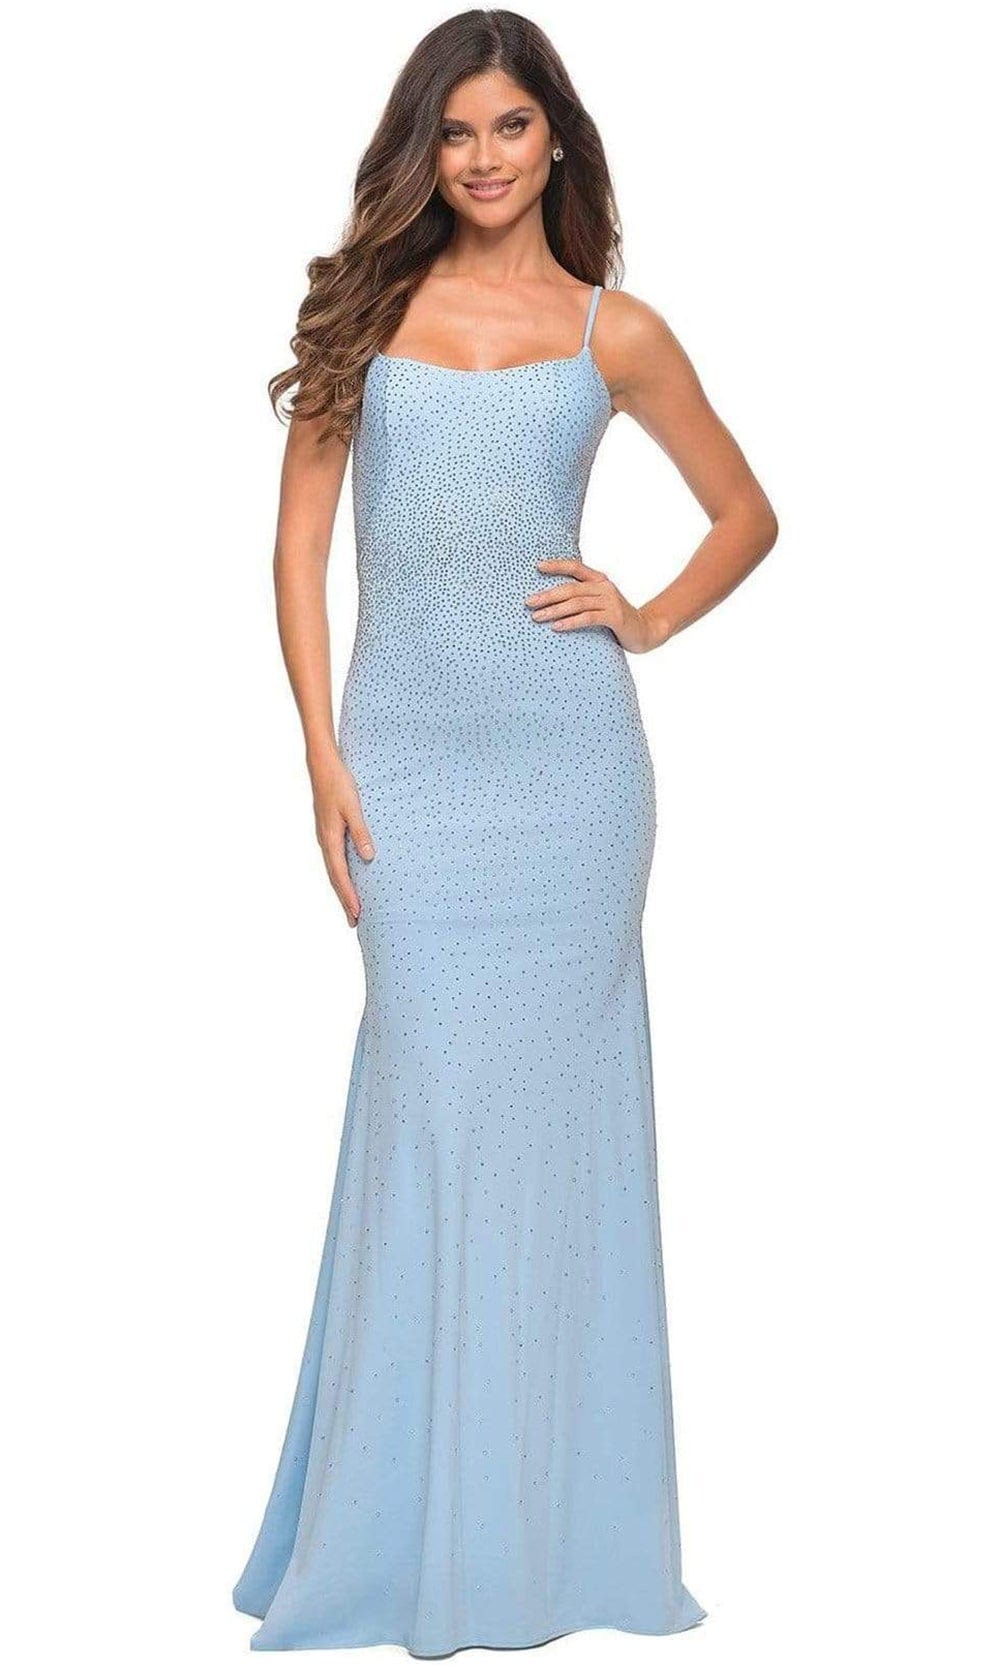 Image of La Femme - 30563 Beaded Square Neck Long Gown